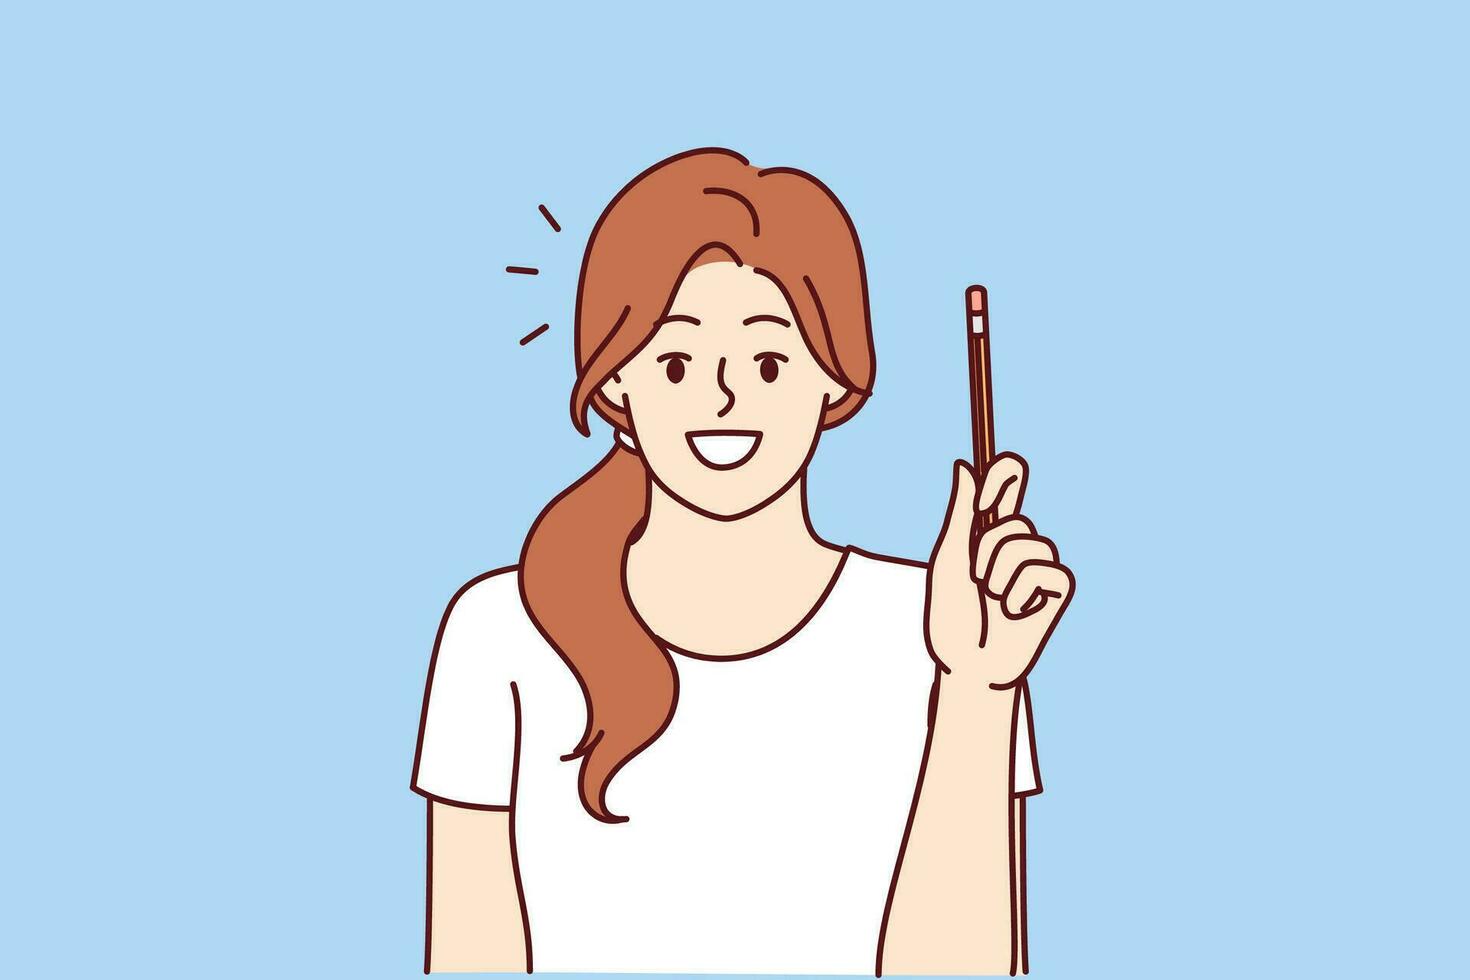 Happy woman has come up with new idea and is holding up pencil to share thoughts and discuss topic. Young inspired girl with smile looks at screen, recommending listening to cool idea to improve life. vector